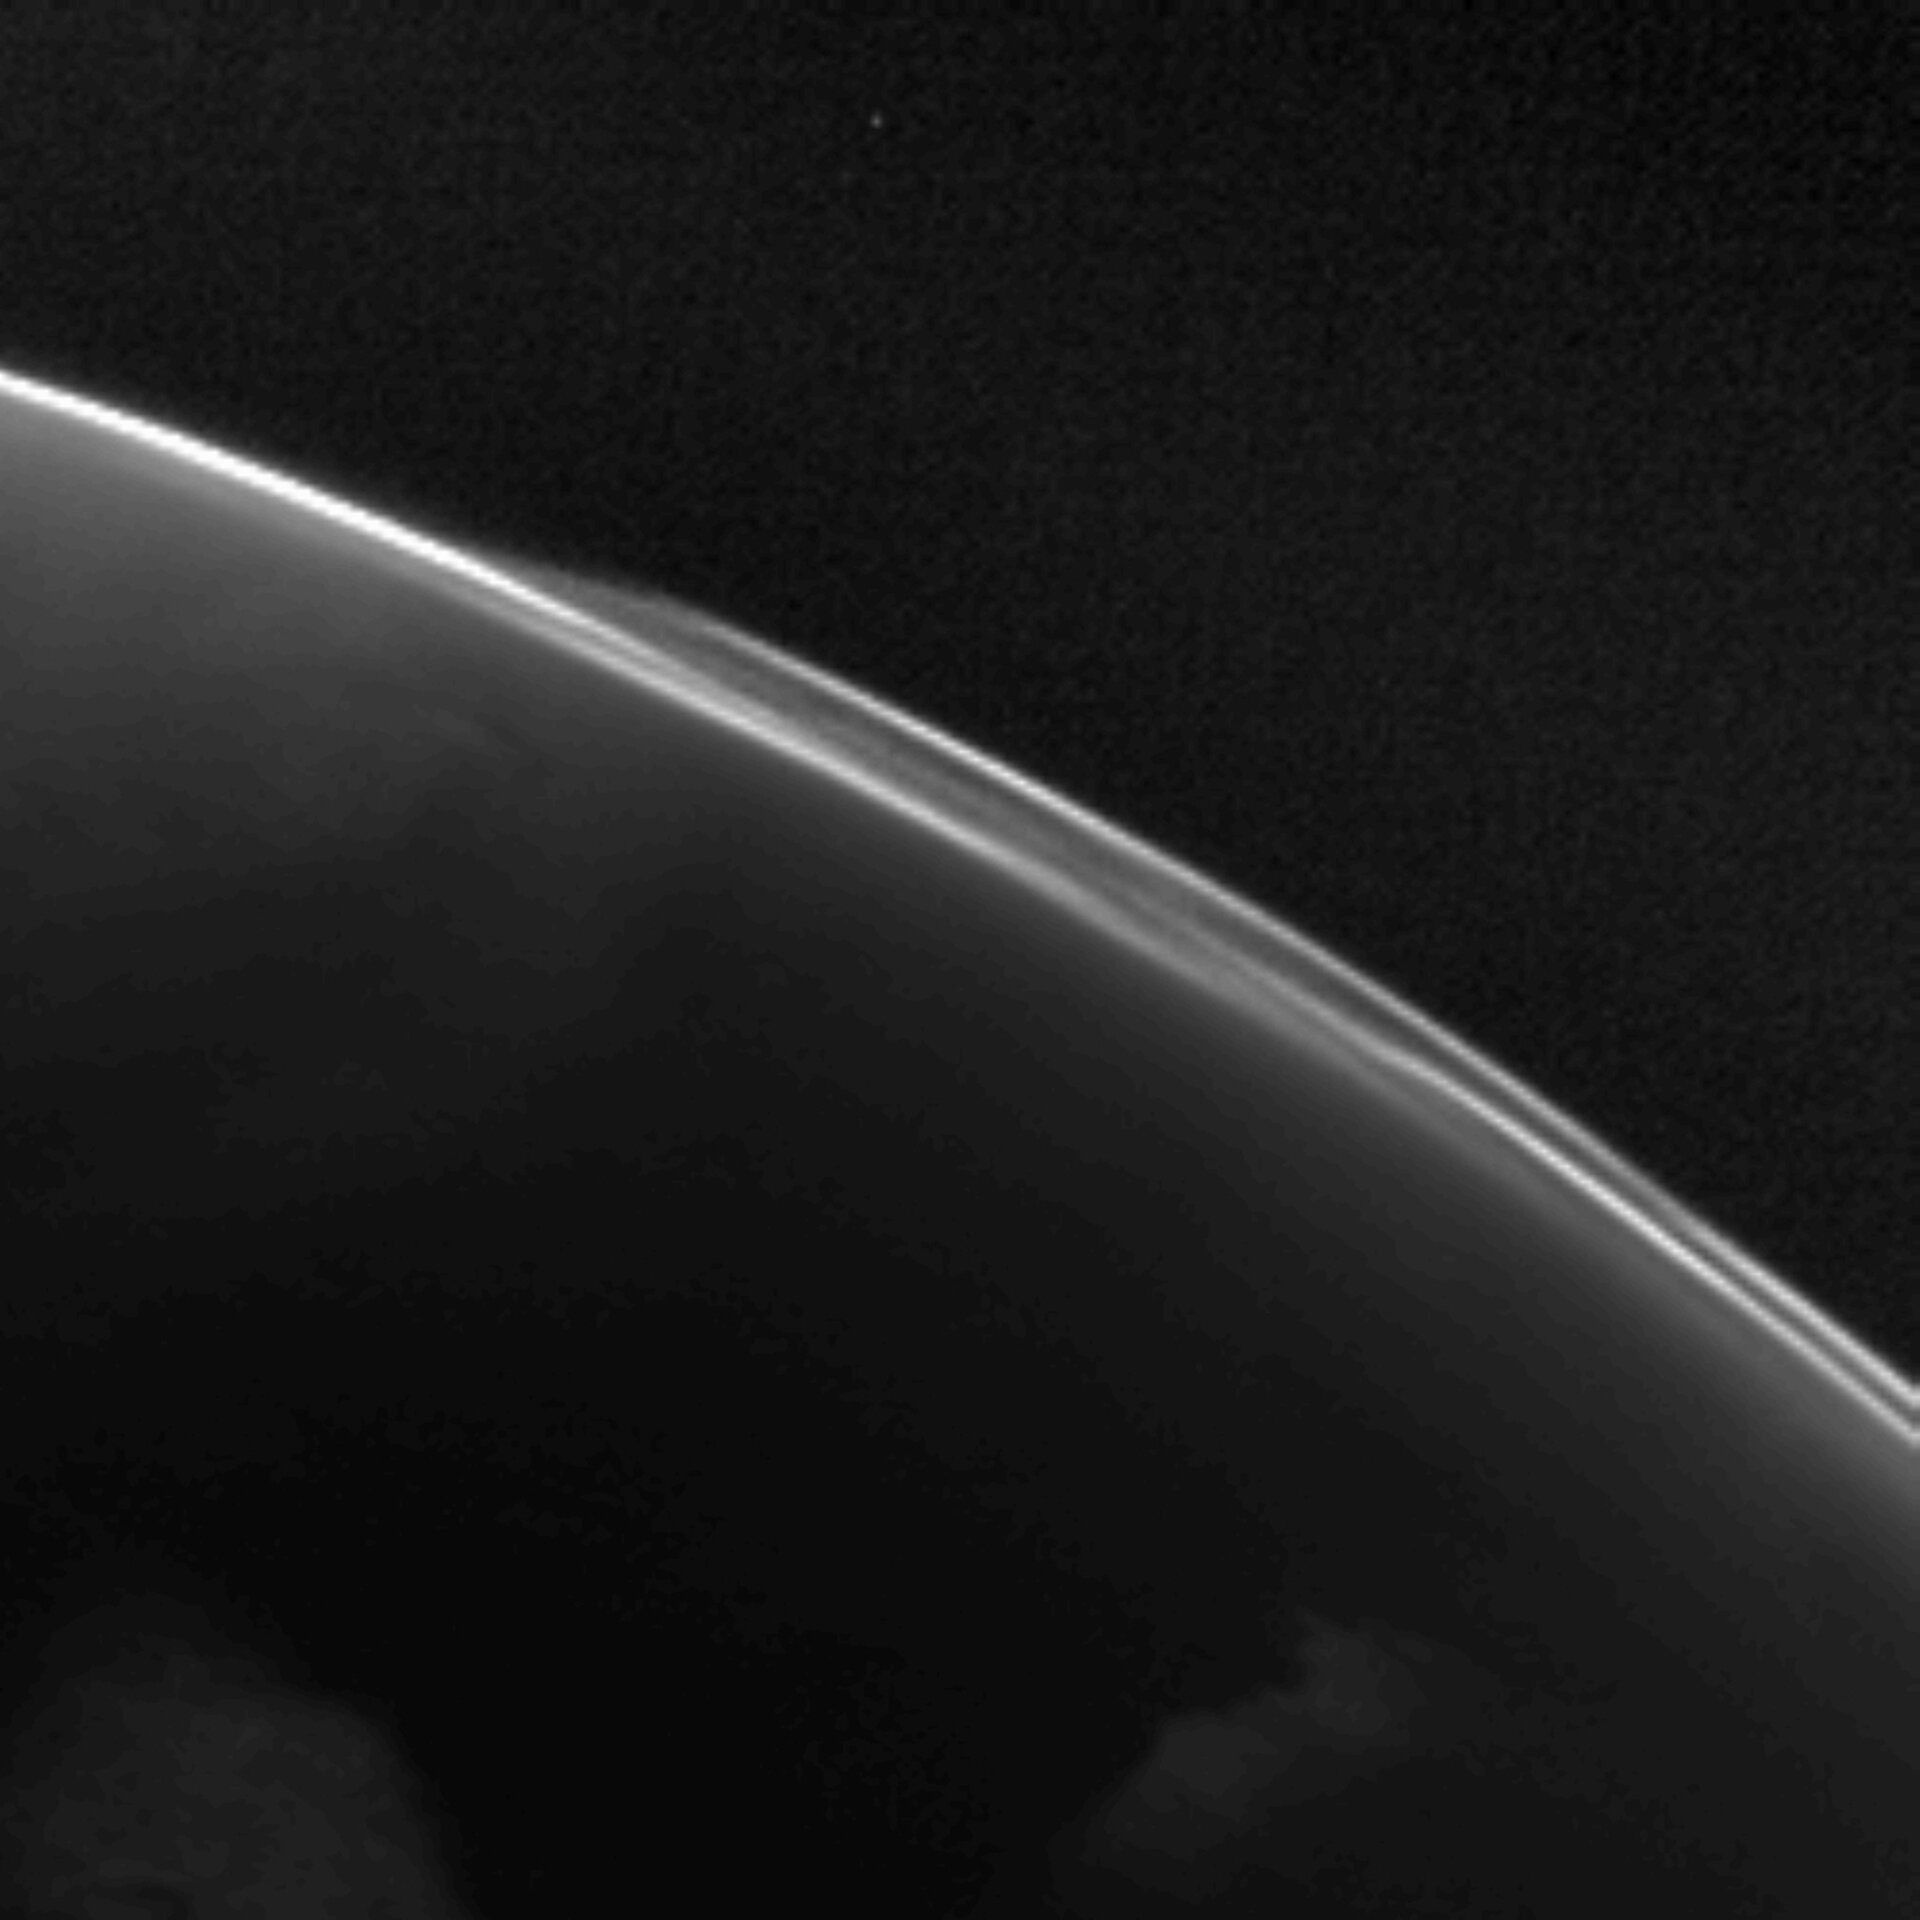 OSIRIS image of atmospheric structures of Mars